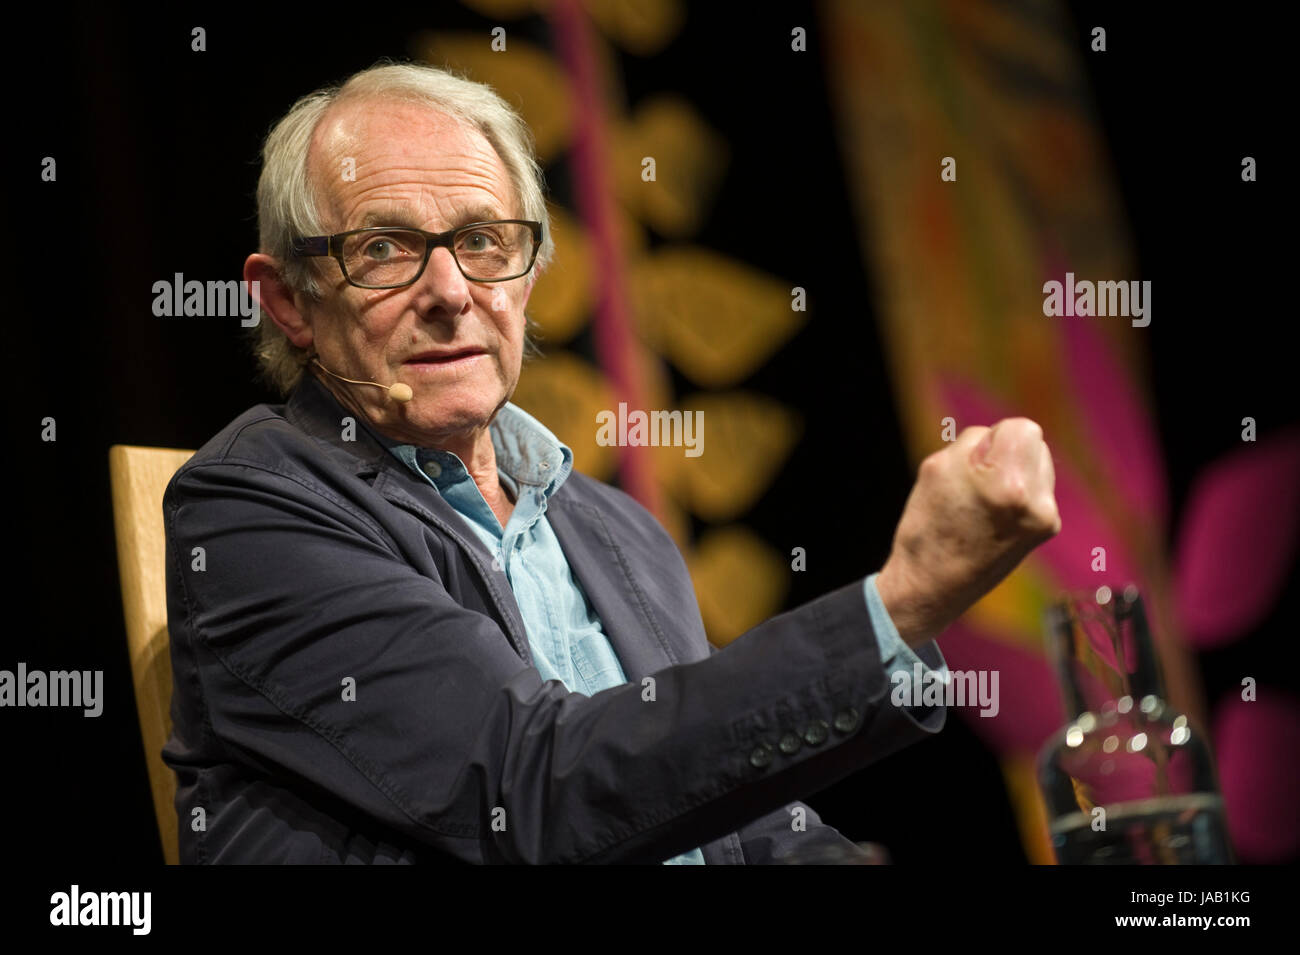 Ken Loach film director speaking about culture, society and his style of social realism on stage at Hay Festival of Literature and the Arts 2017 Hay-on-Wye Powys Wales UK Stock Photo